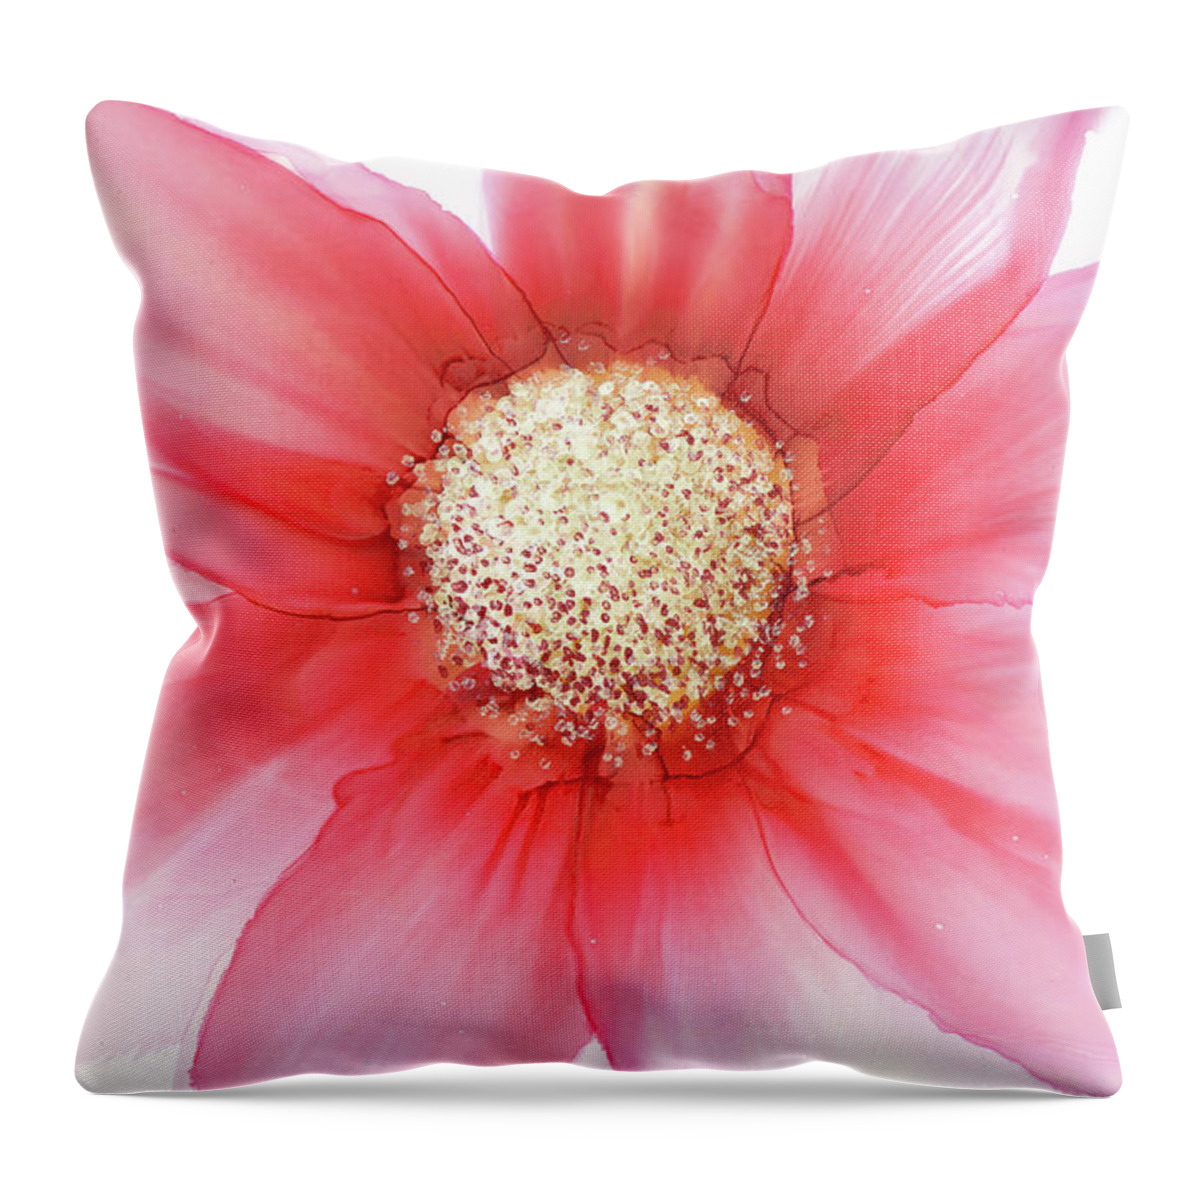 Floral Throw Pillow featuring the painting Beginnings by Kimberly Deene Langlois